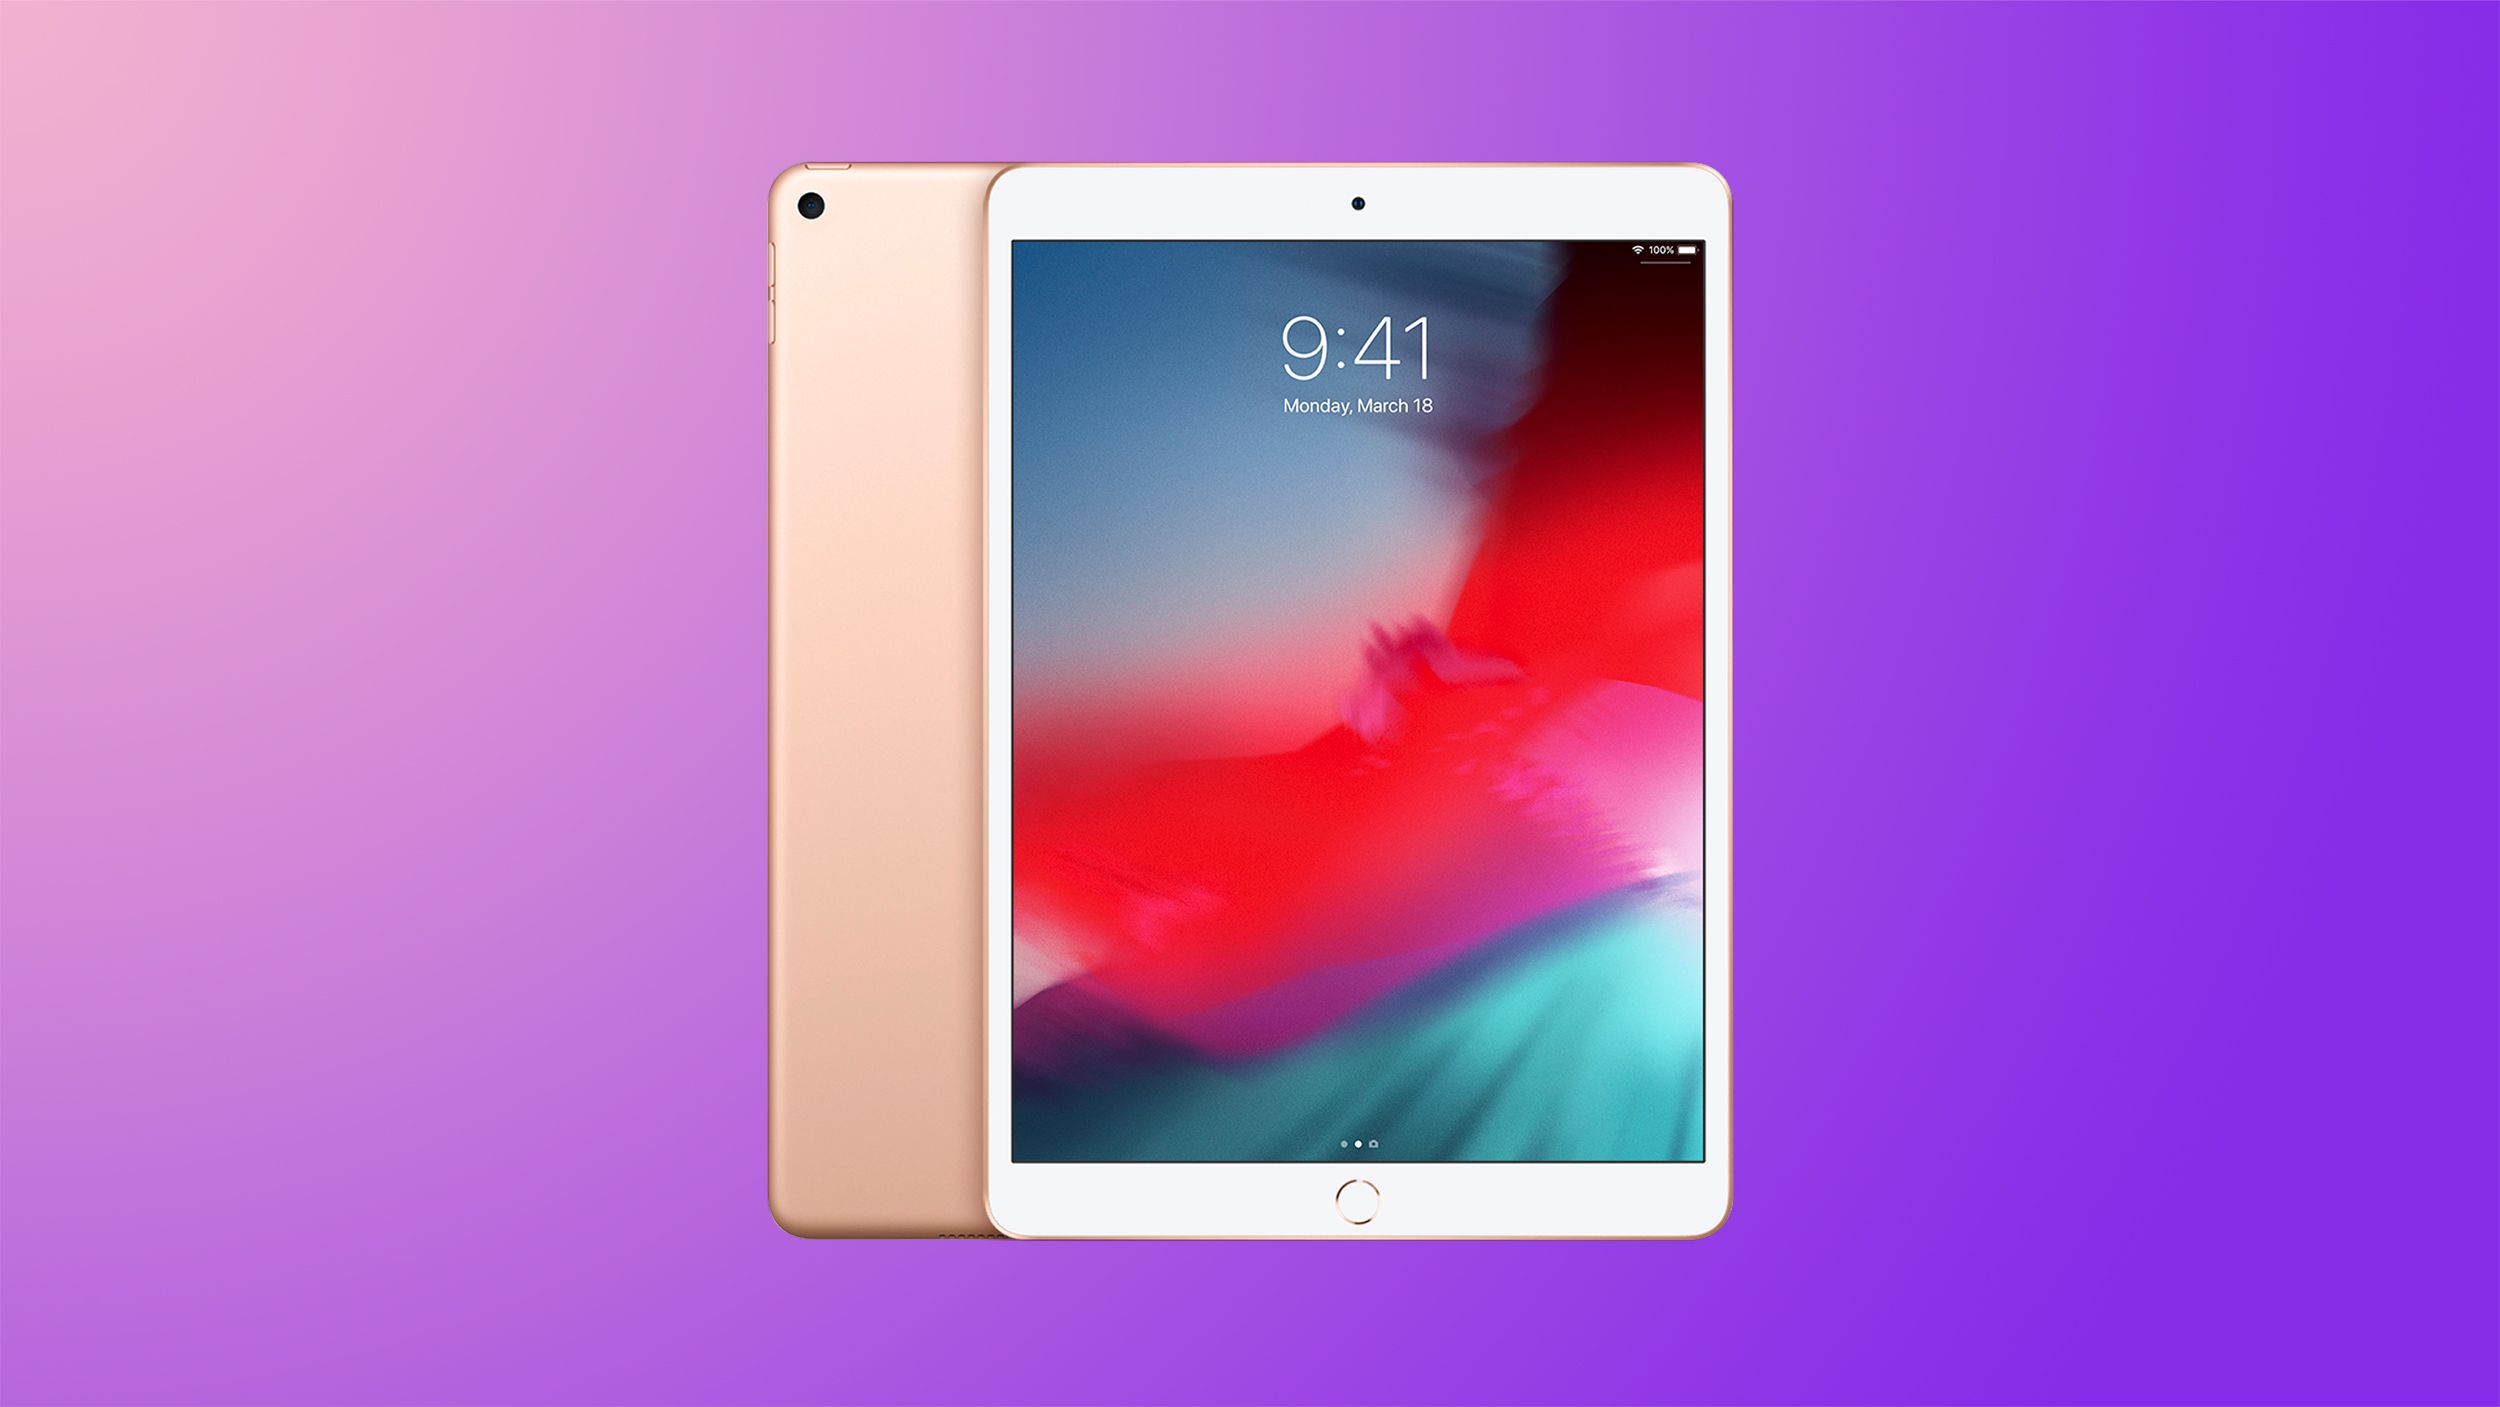 The next low-cost iPad will have a thinner and lighter design